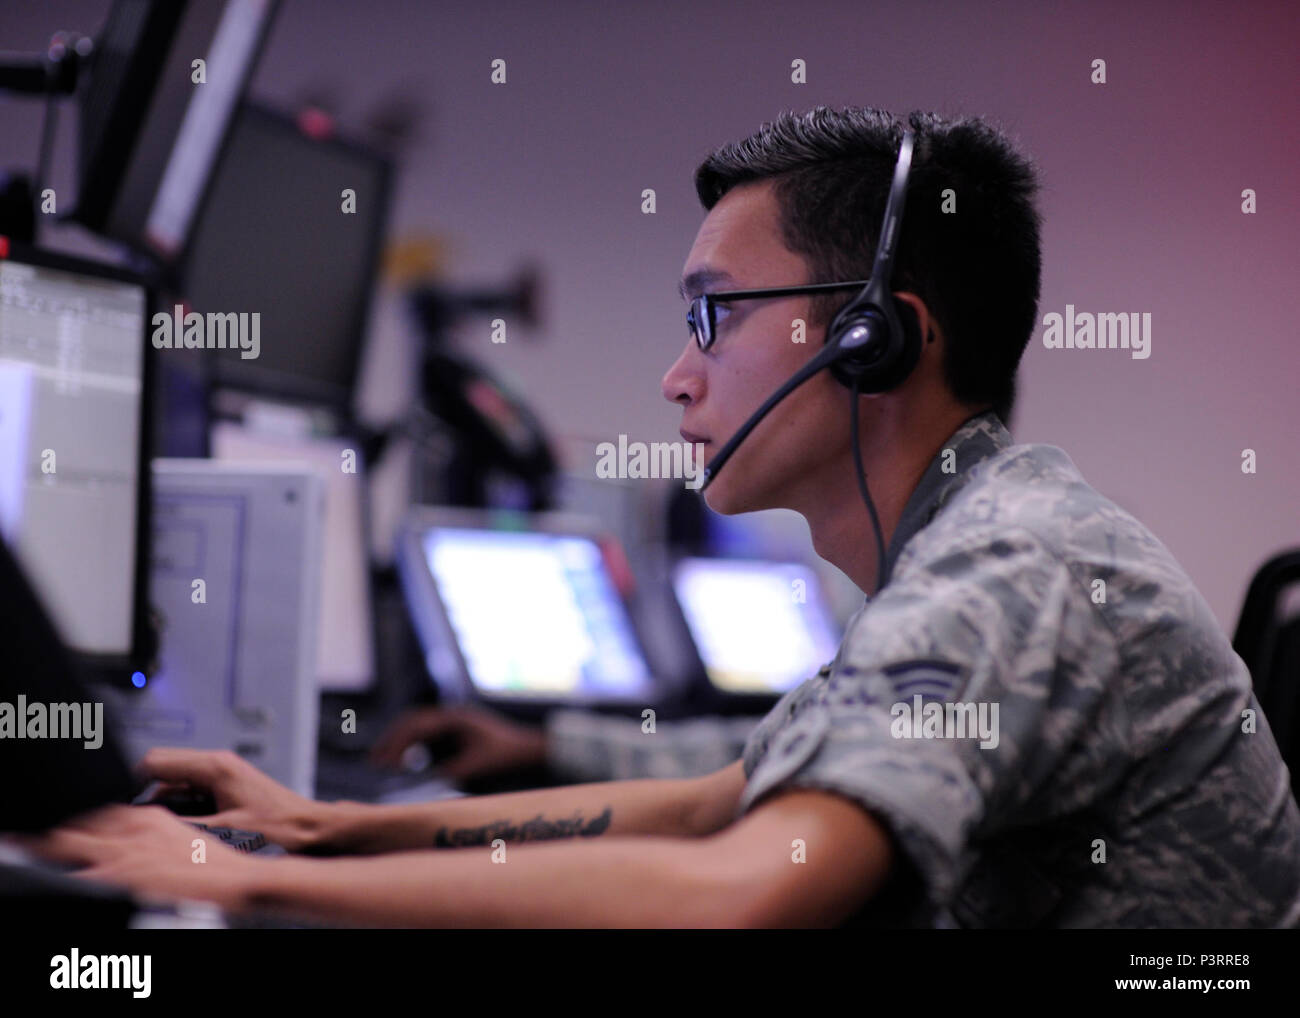 Senior Airman Dakota Rimbach from the 81st Range Control Squadron runs a command and control mission at the 81st RCS, Tyndall Air Force Base, Fla., July 26,2016. The 81st RCS provides command and control in support of the 53rd Weapons Evaluation Group mission. (U.S. Air Force photo by Senior Airman Solomon Cook/Released) Stock Photo